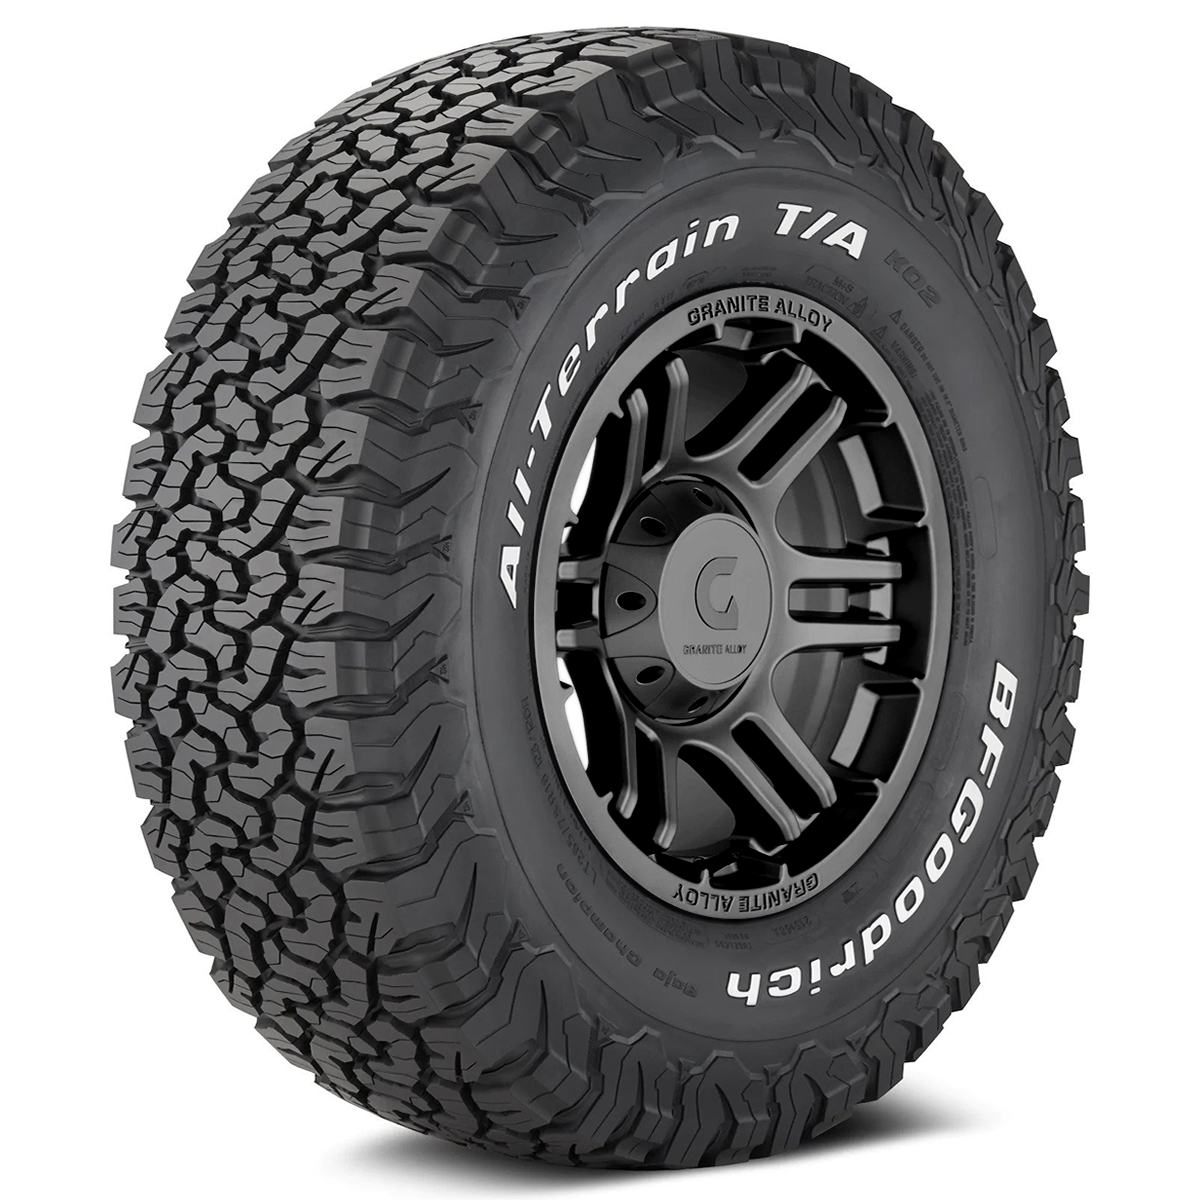 Does Costco Sell Bfgoodrich Tires